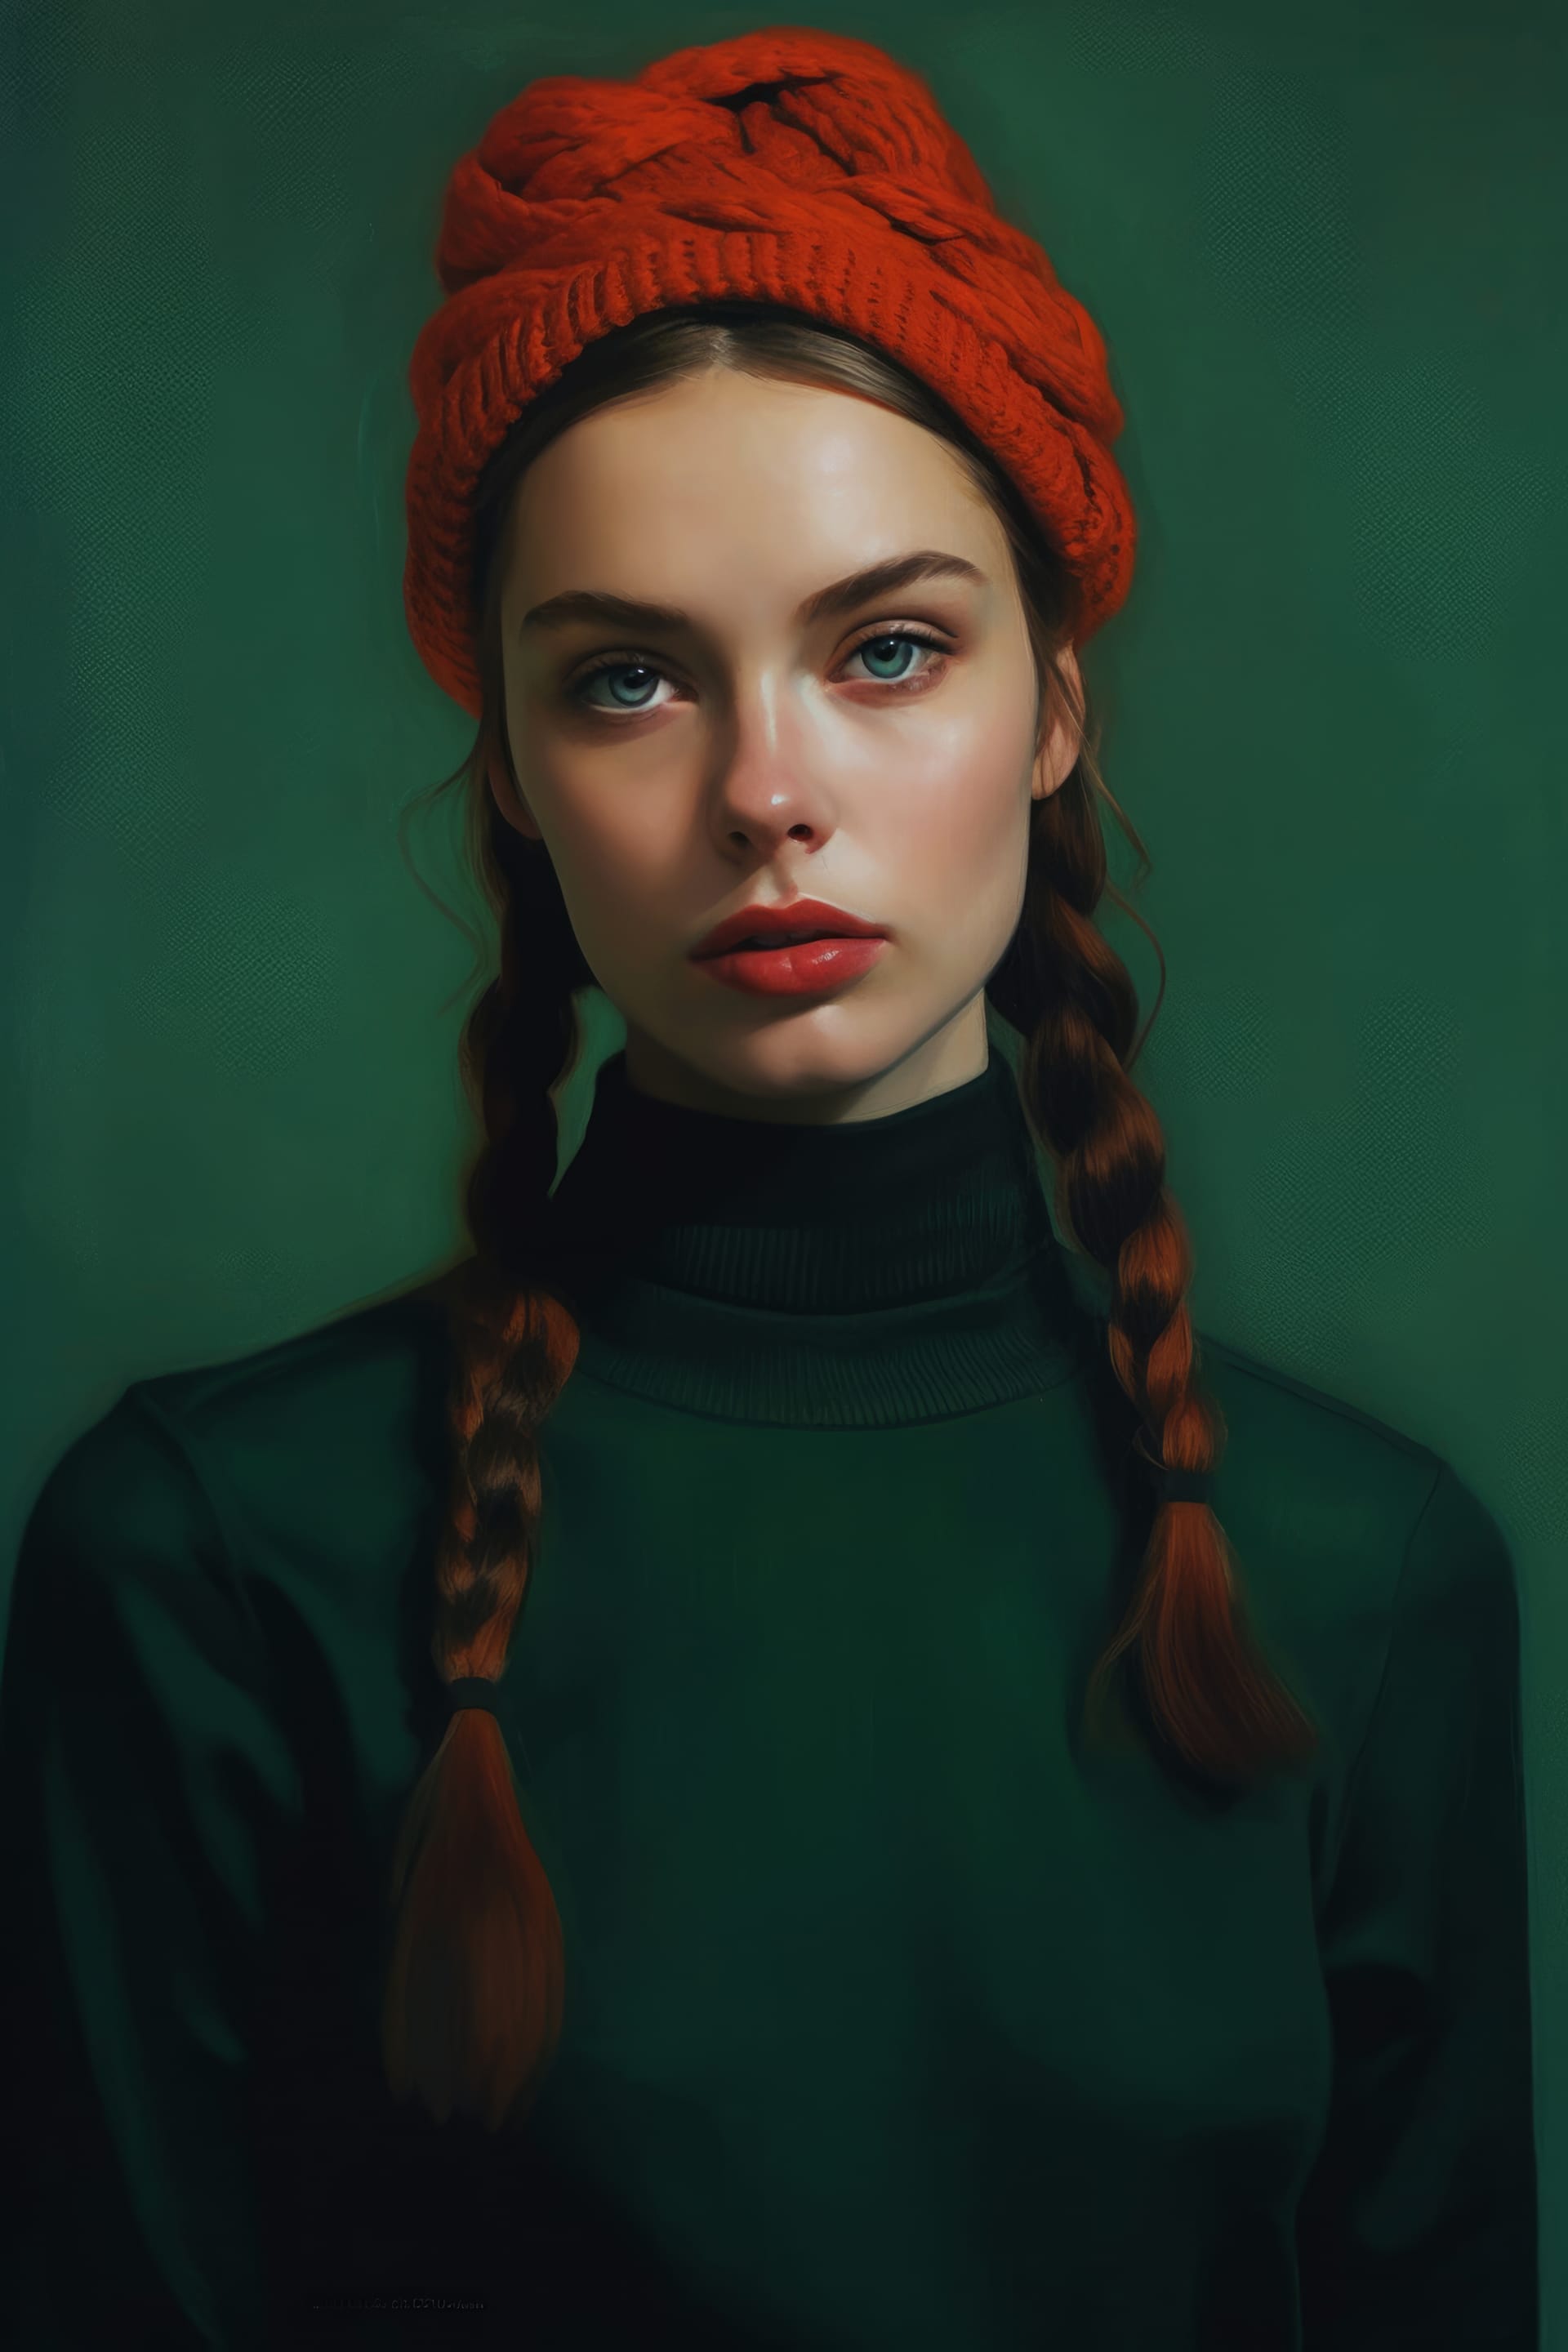 Painting girl with braids red hat luminous image